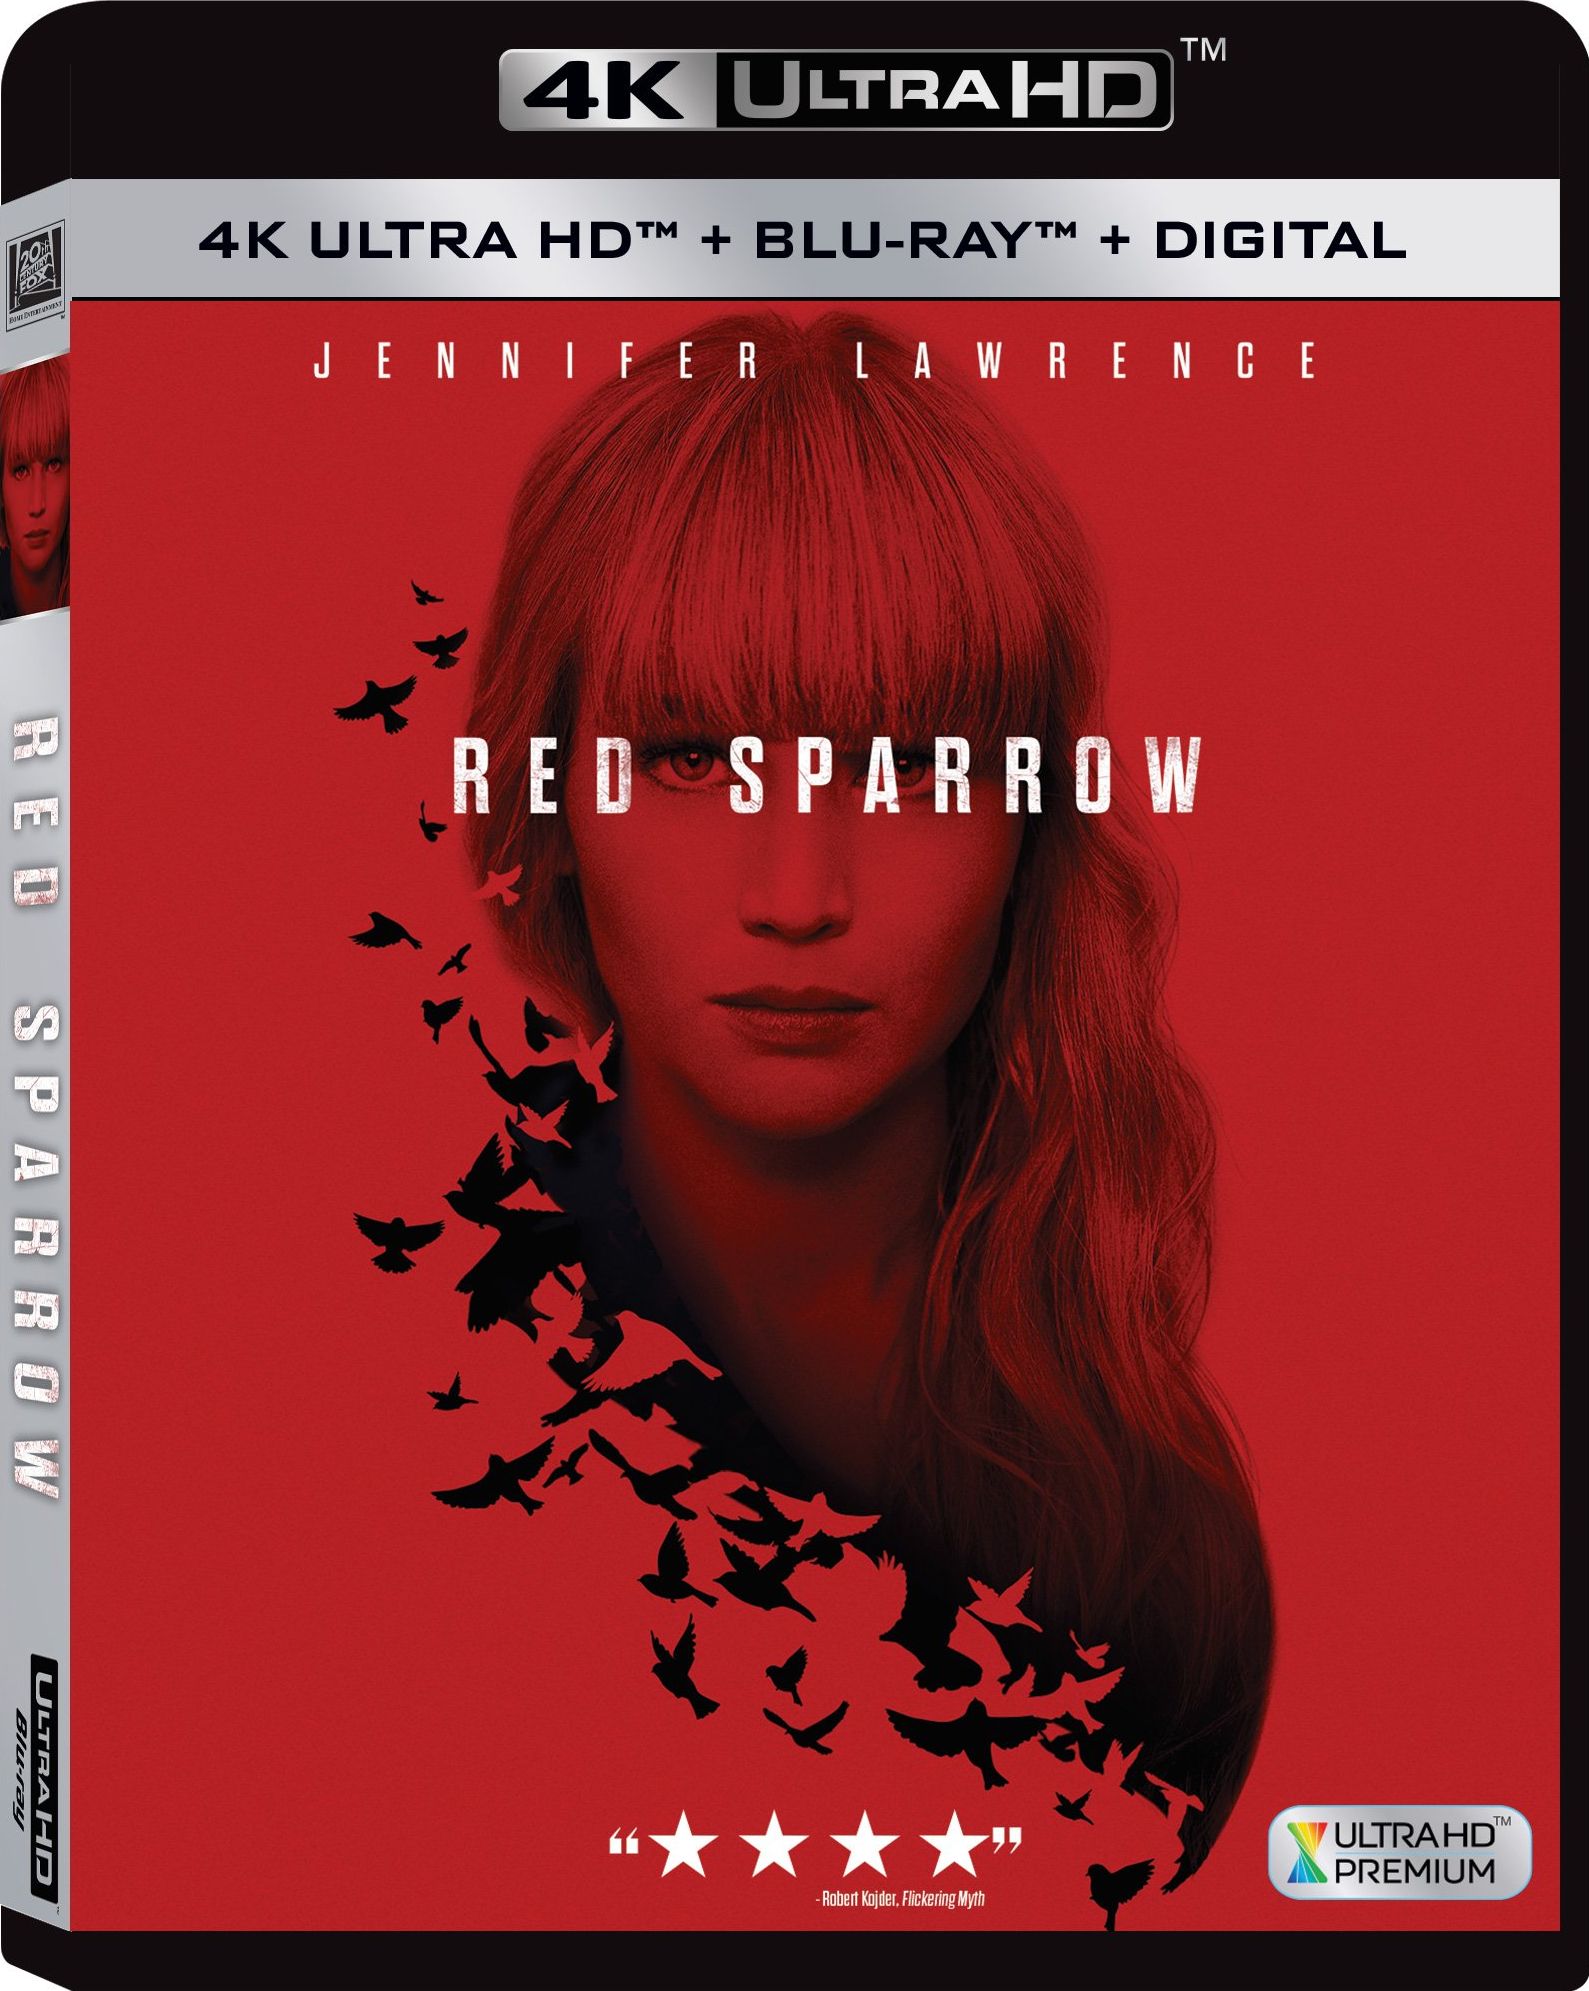 Red Sparrow DVD Release Date May 22, 2018